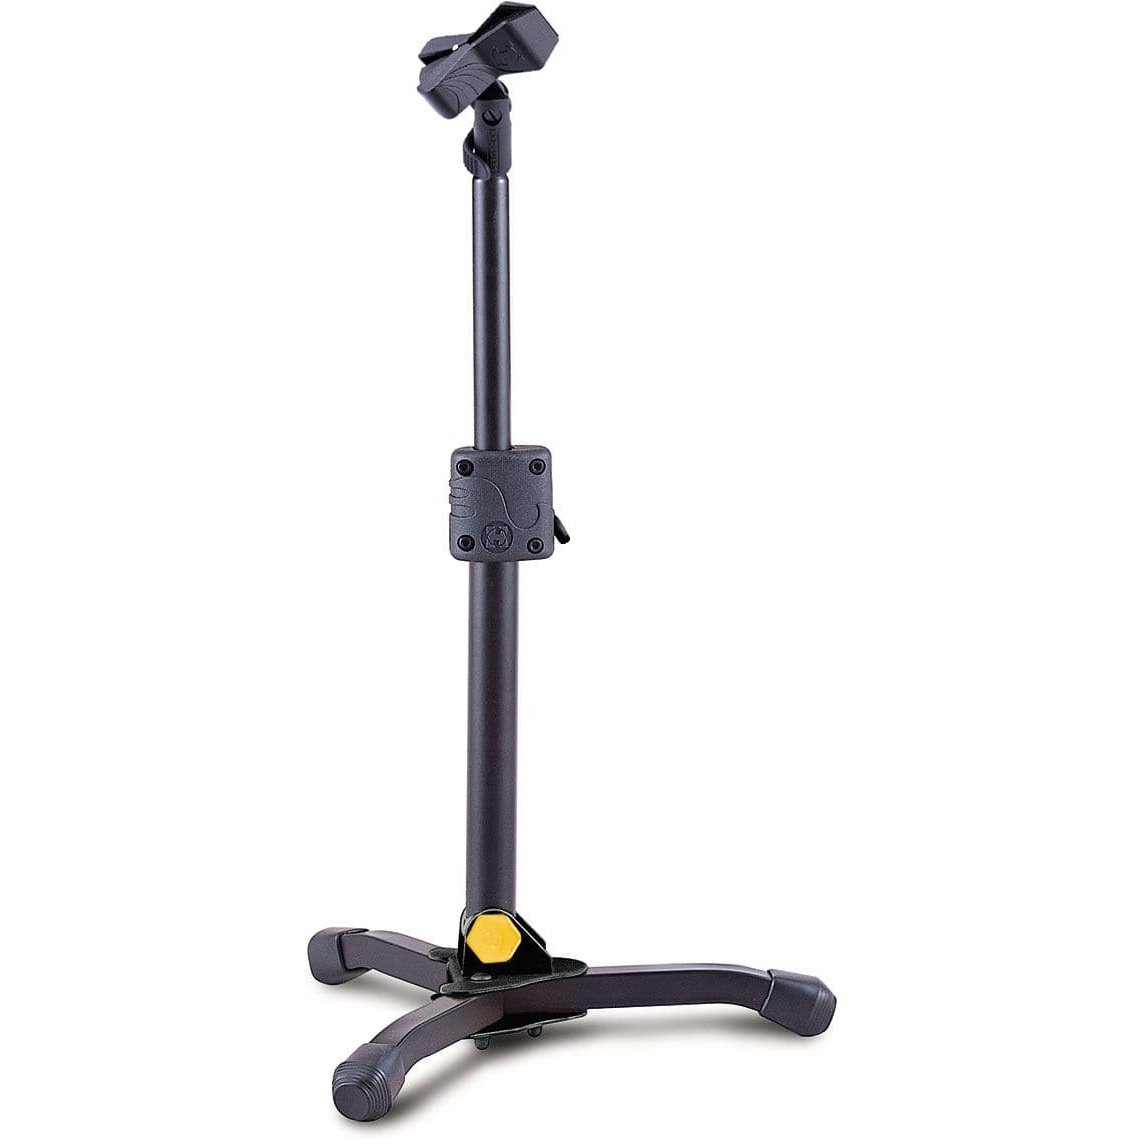 Hercules Low Profile Round Base Microphone Stand w/EZ Microphone